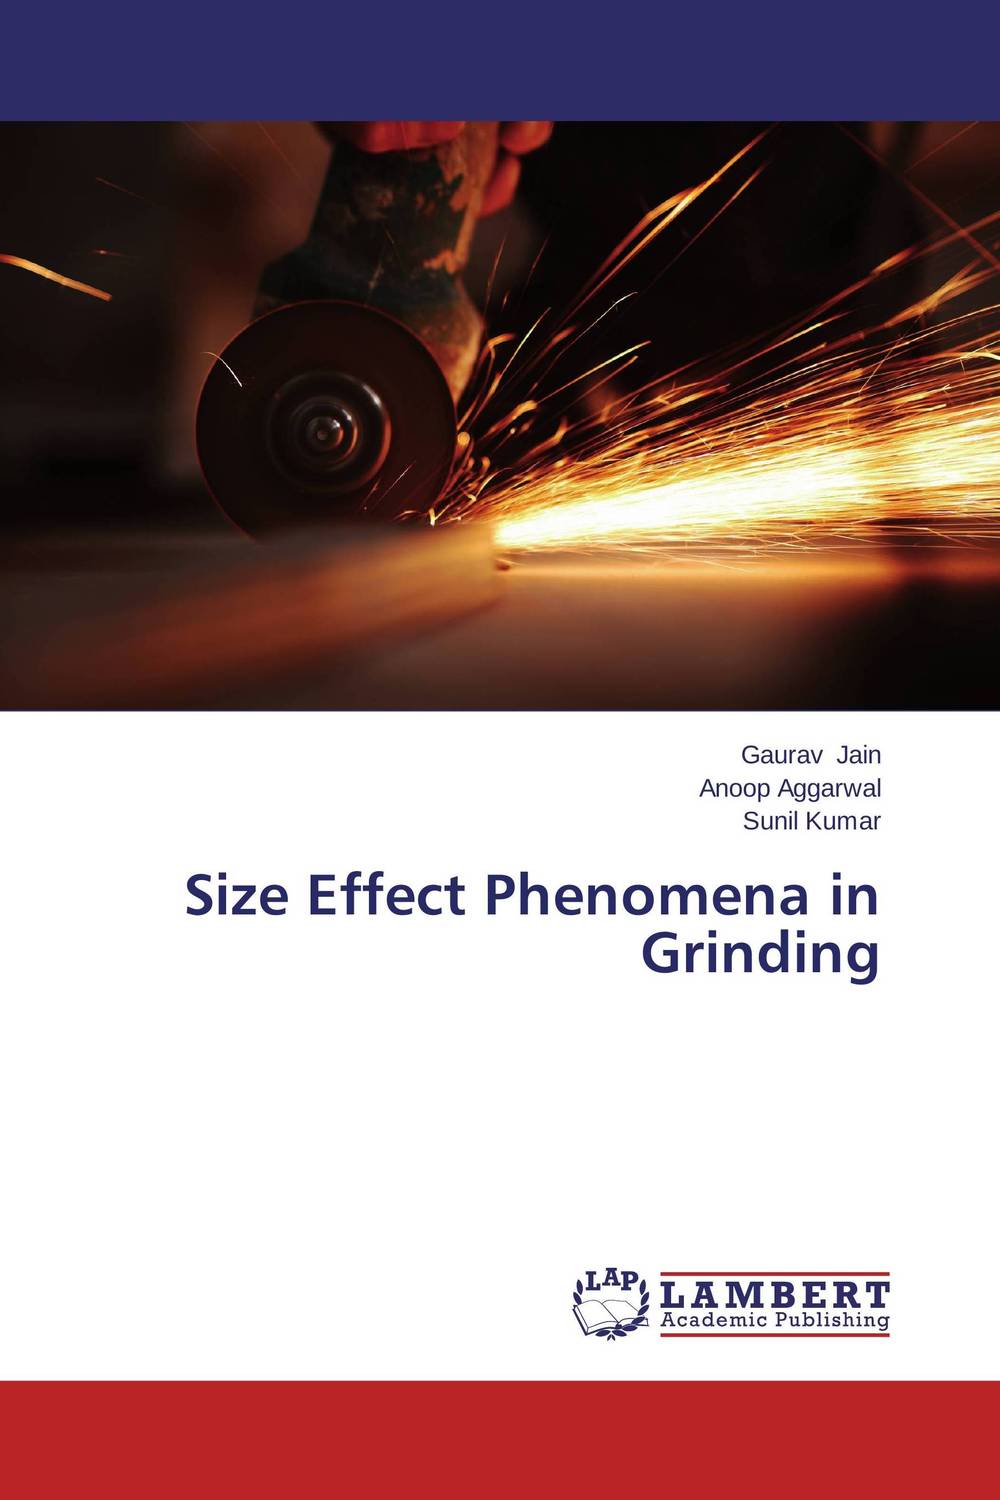 Size Effect Phenomena in Grinding